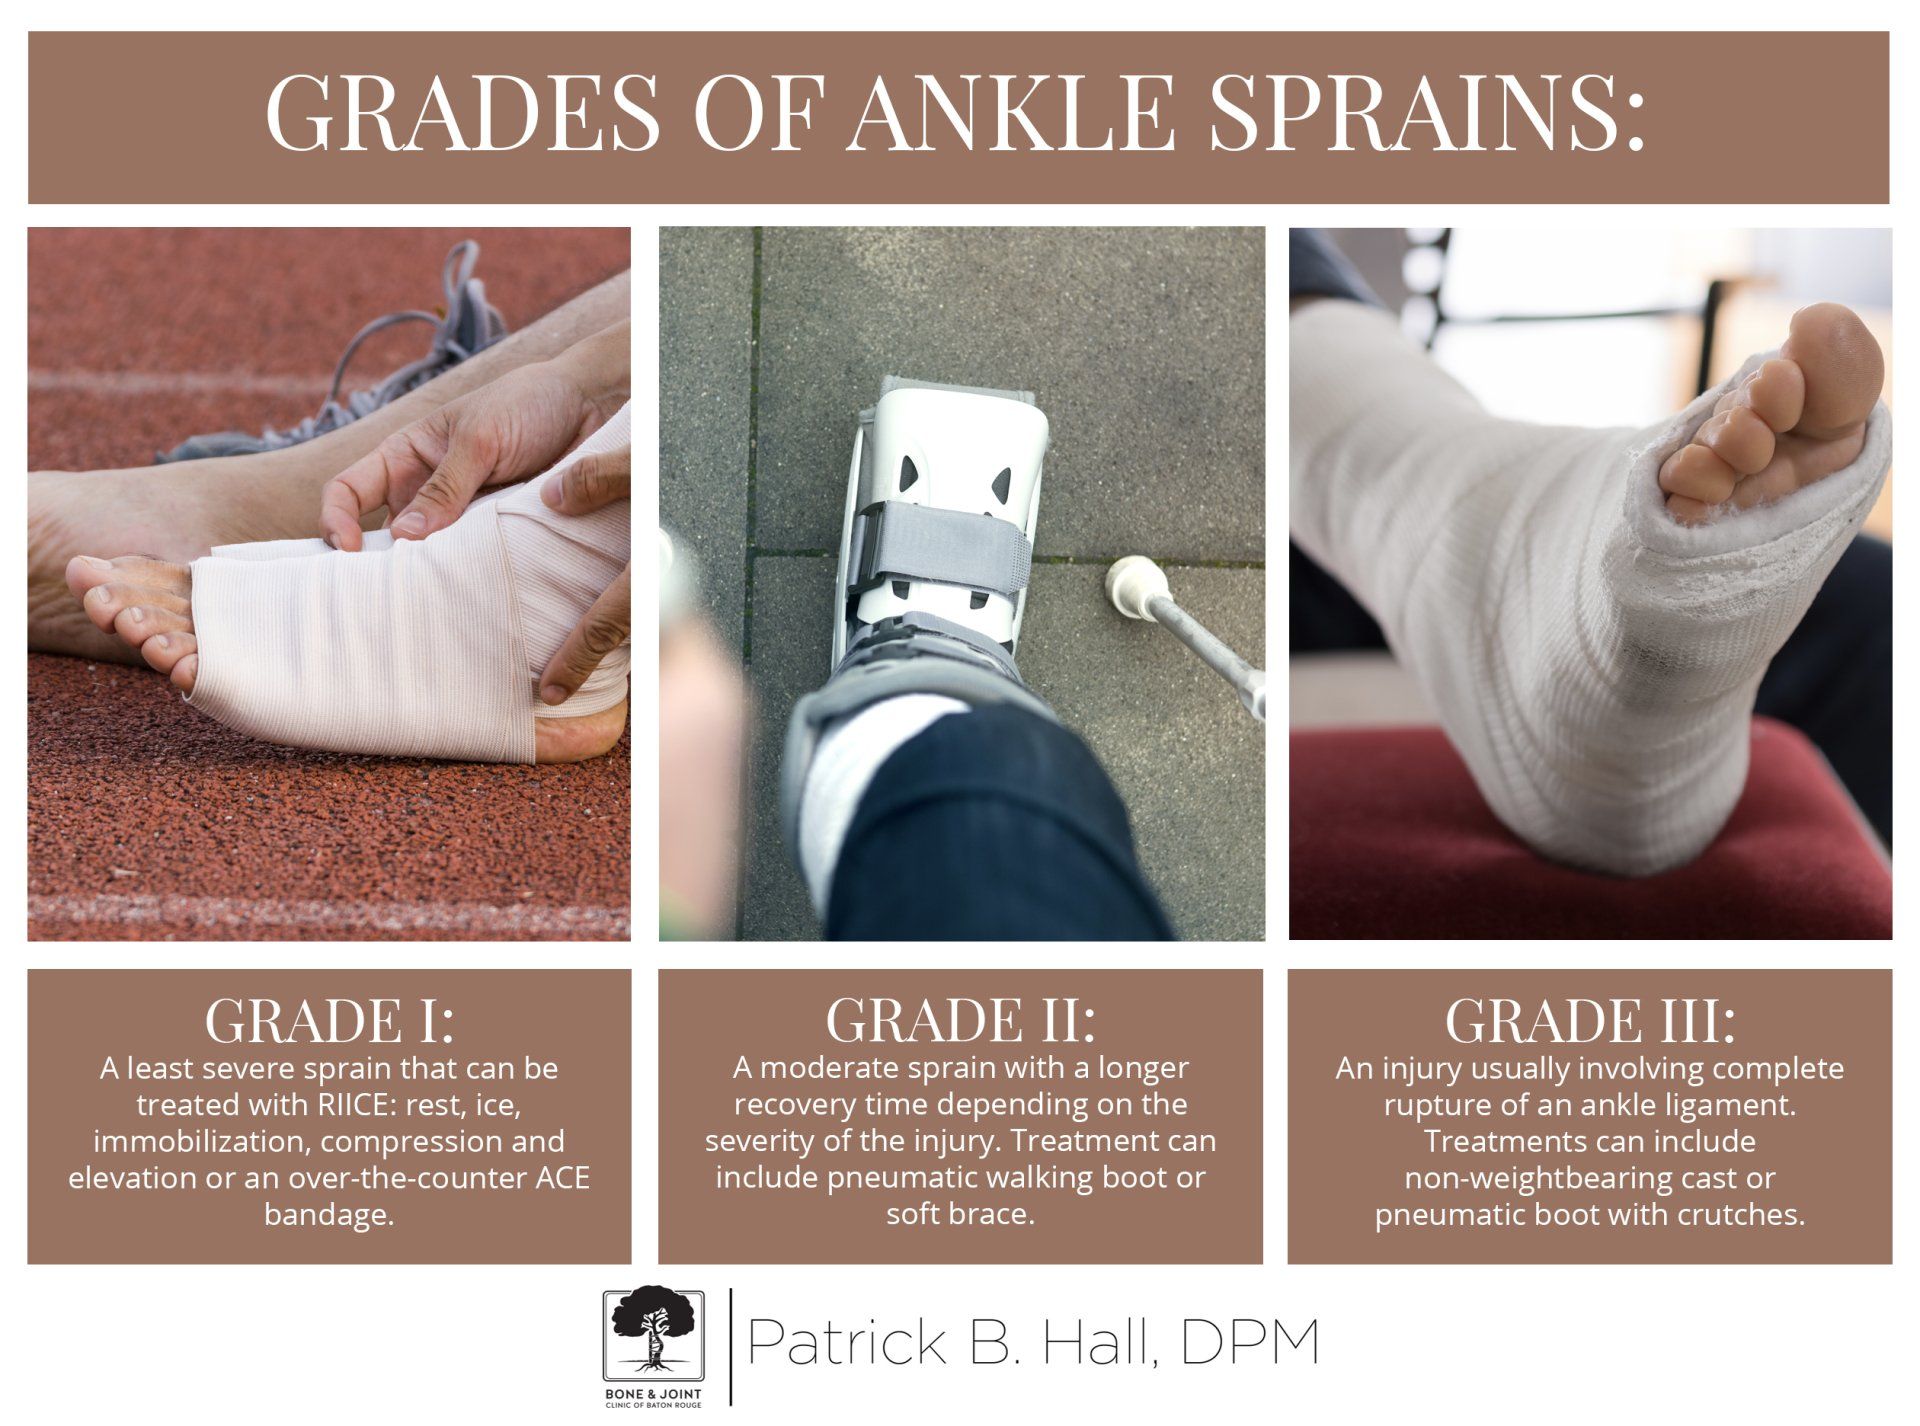 Grades of Ankle Sprains told by Patrick Hall, DPM